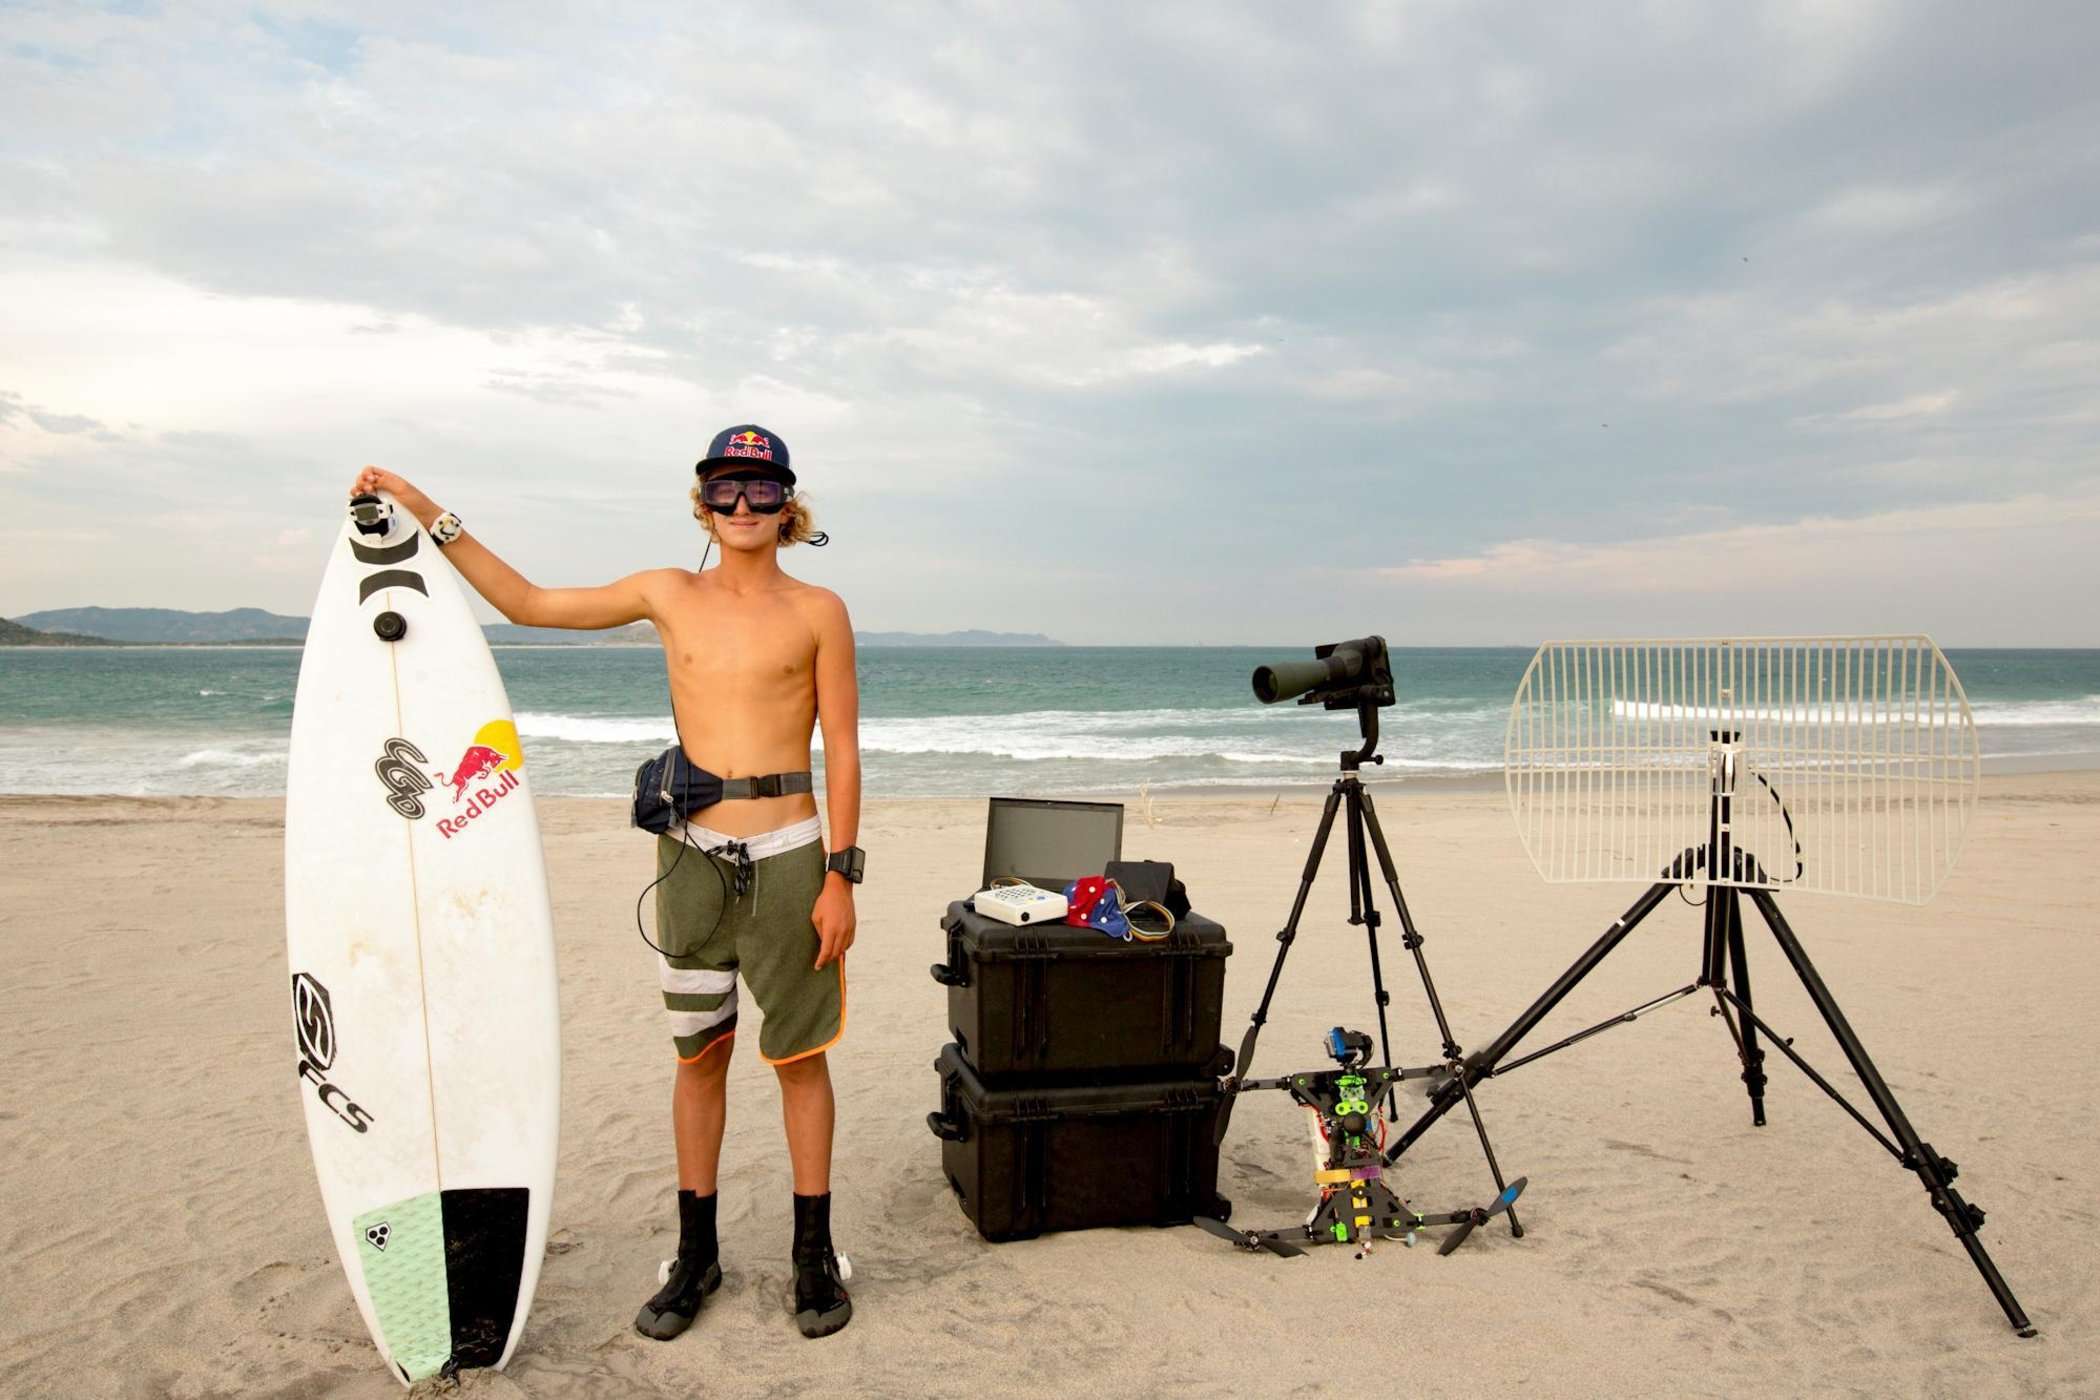 PPS Technology and Red Bull team up to improve athlete surfing performance in Mexico.